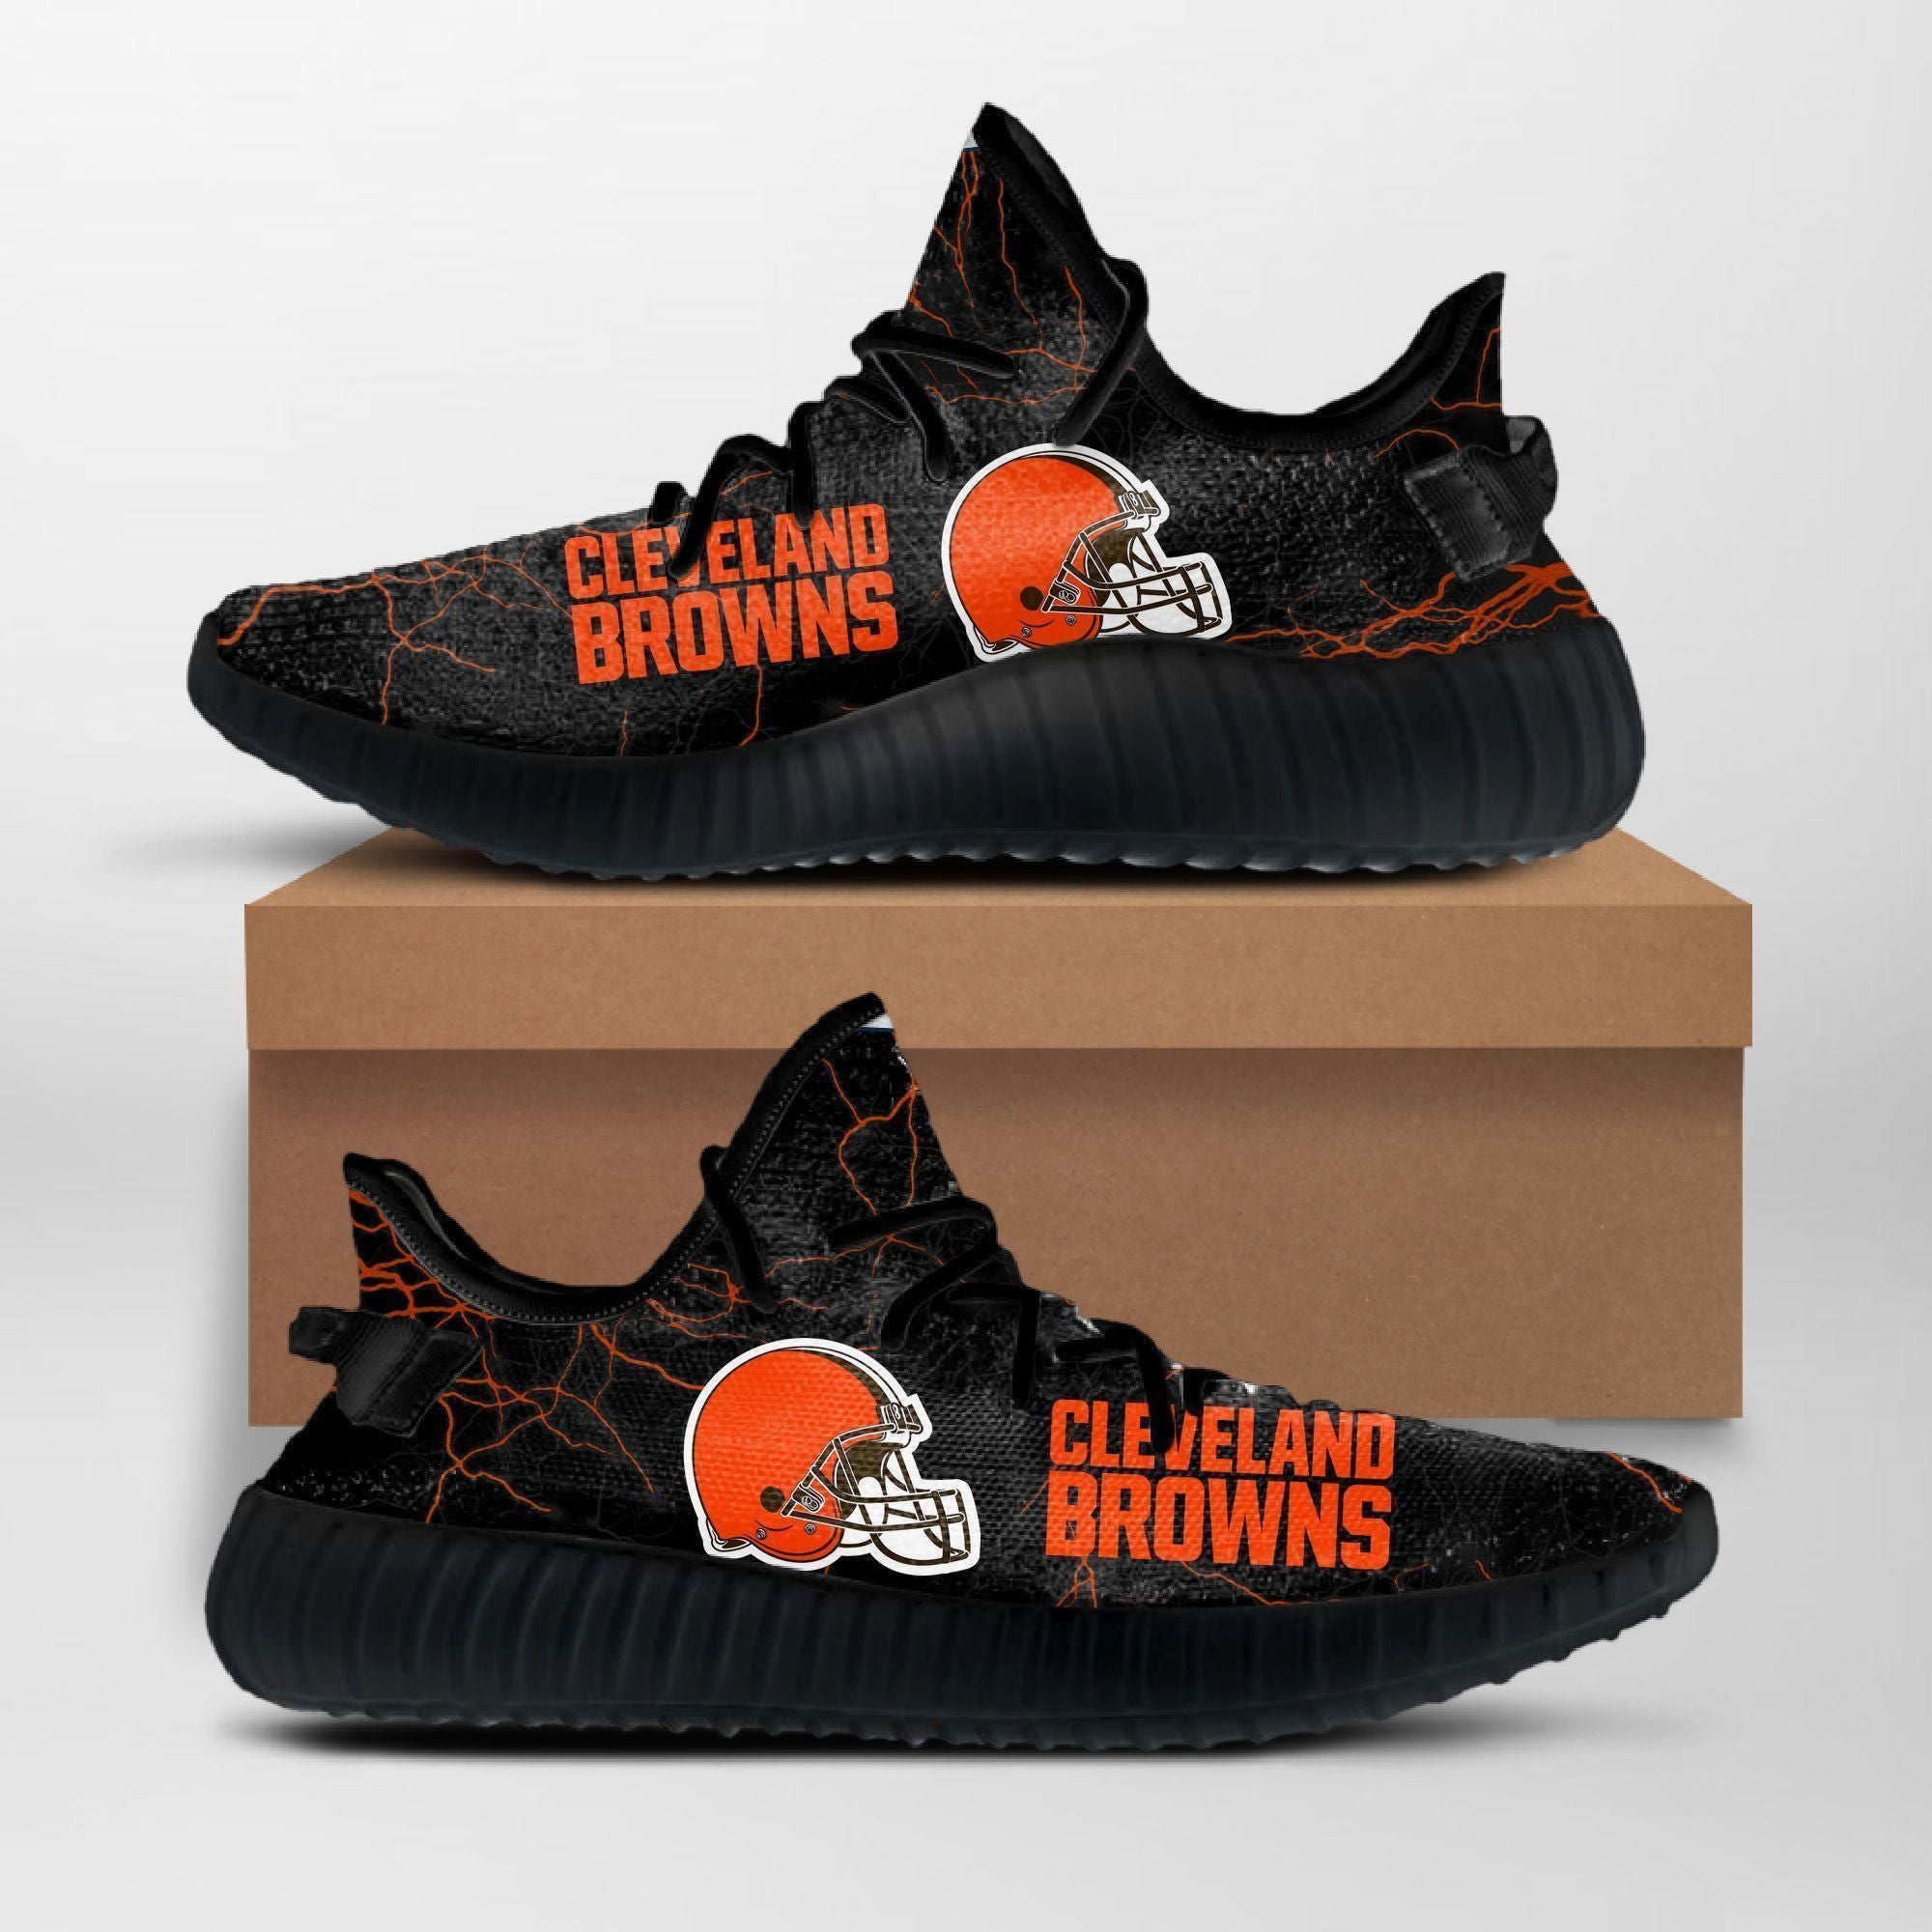 Buy Cleveland Browns Custom Yeezy NFL Custom Yeezy Shoes For Fans Yeezy Boost 350 V2 Top Trending Shoes Gift